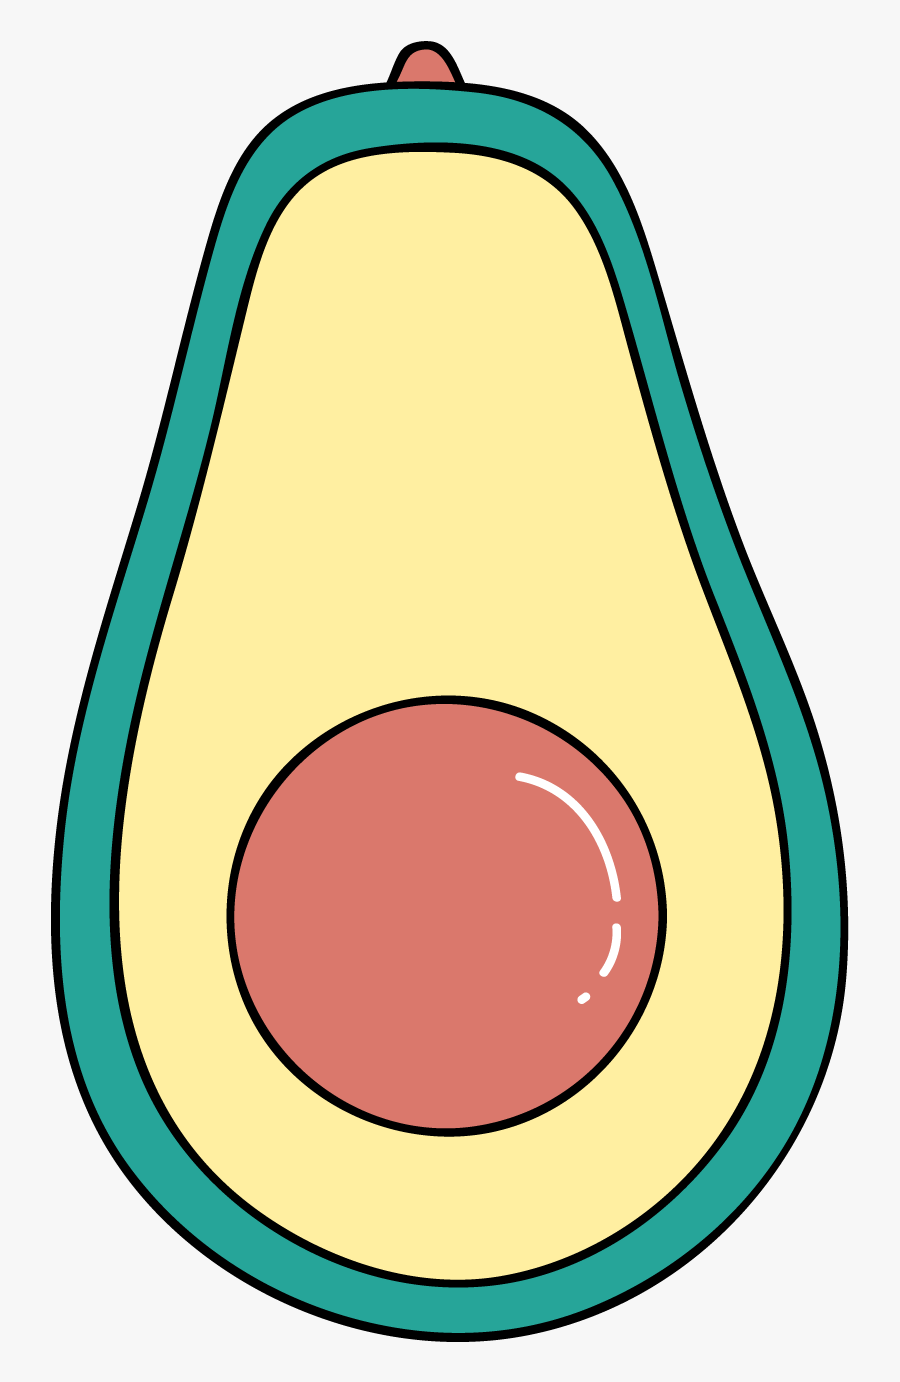 First Non-ideal Avocado Cut In Half - Frictional Force, Transparent Clipart